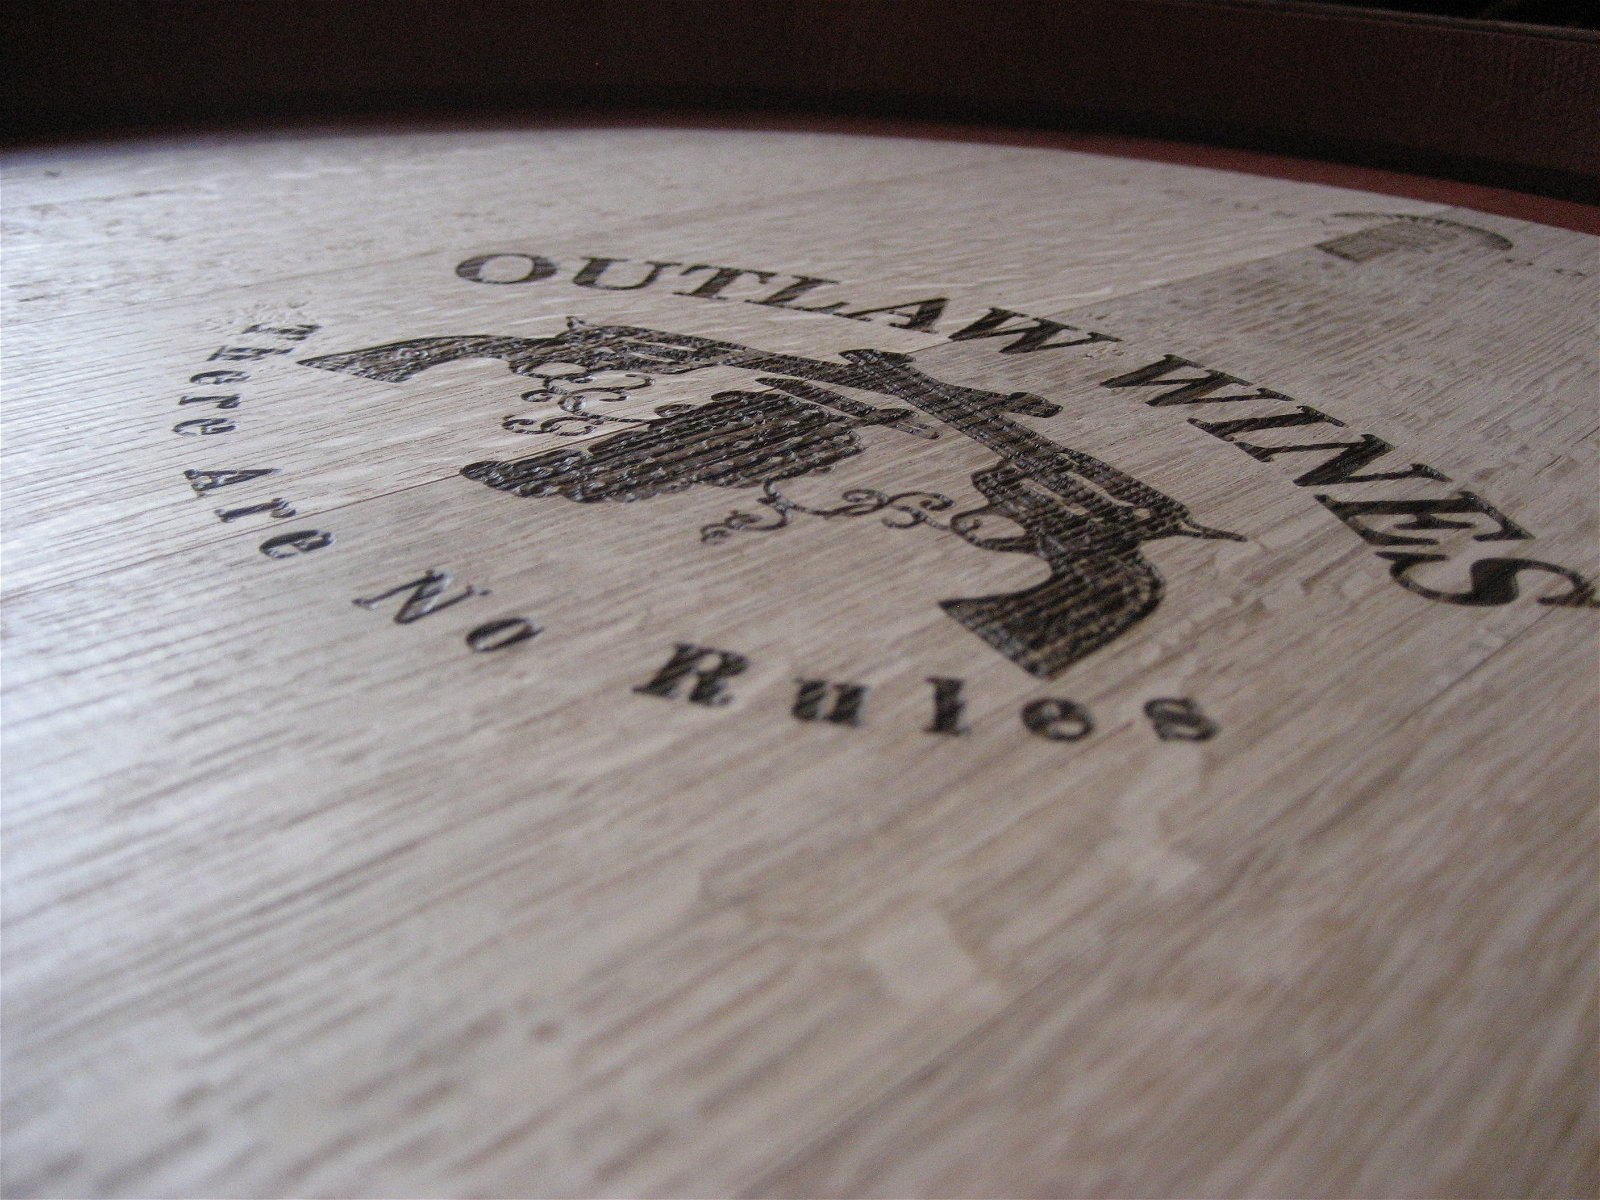 Outlaw Wines